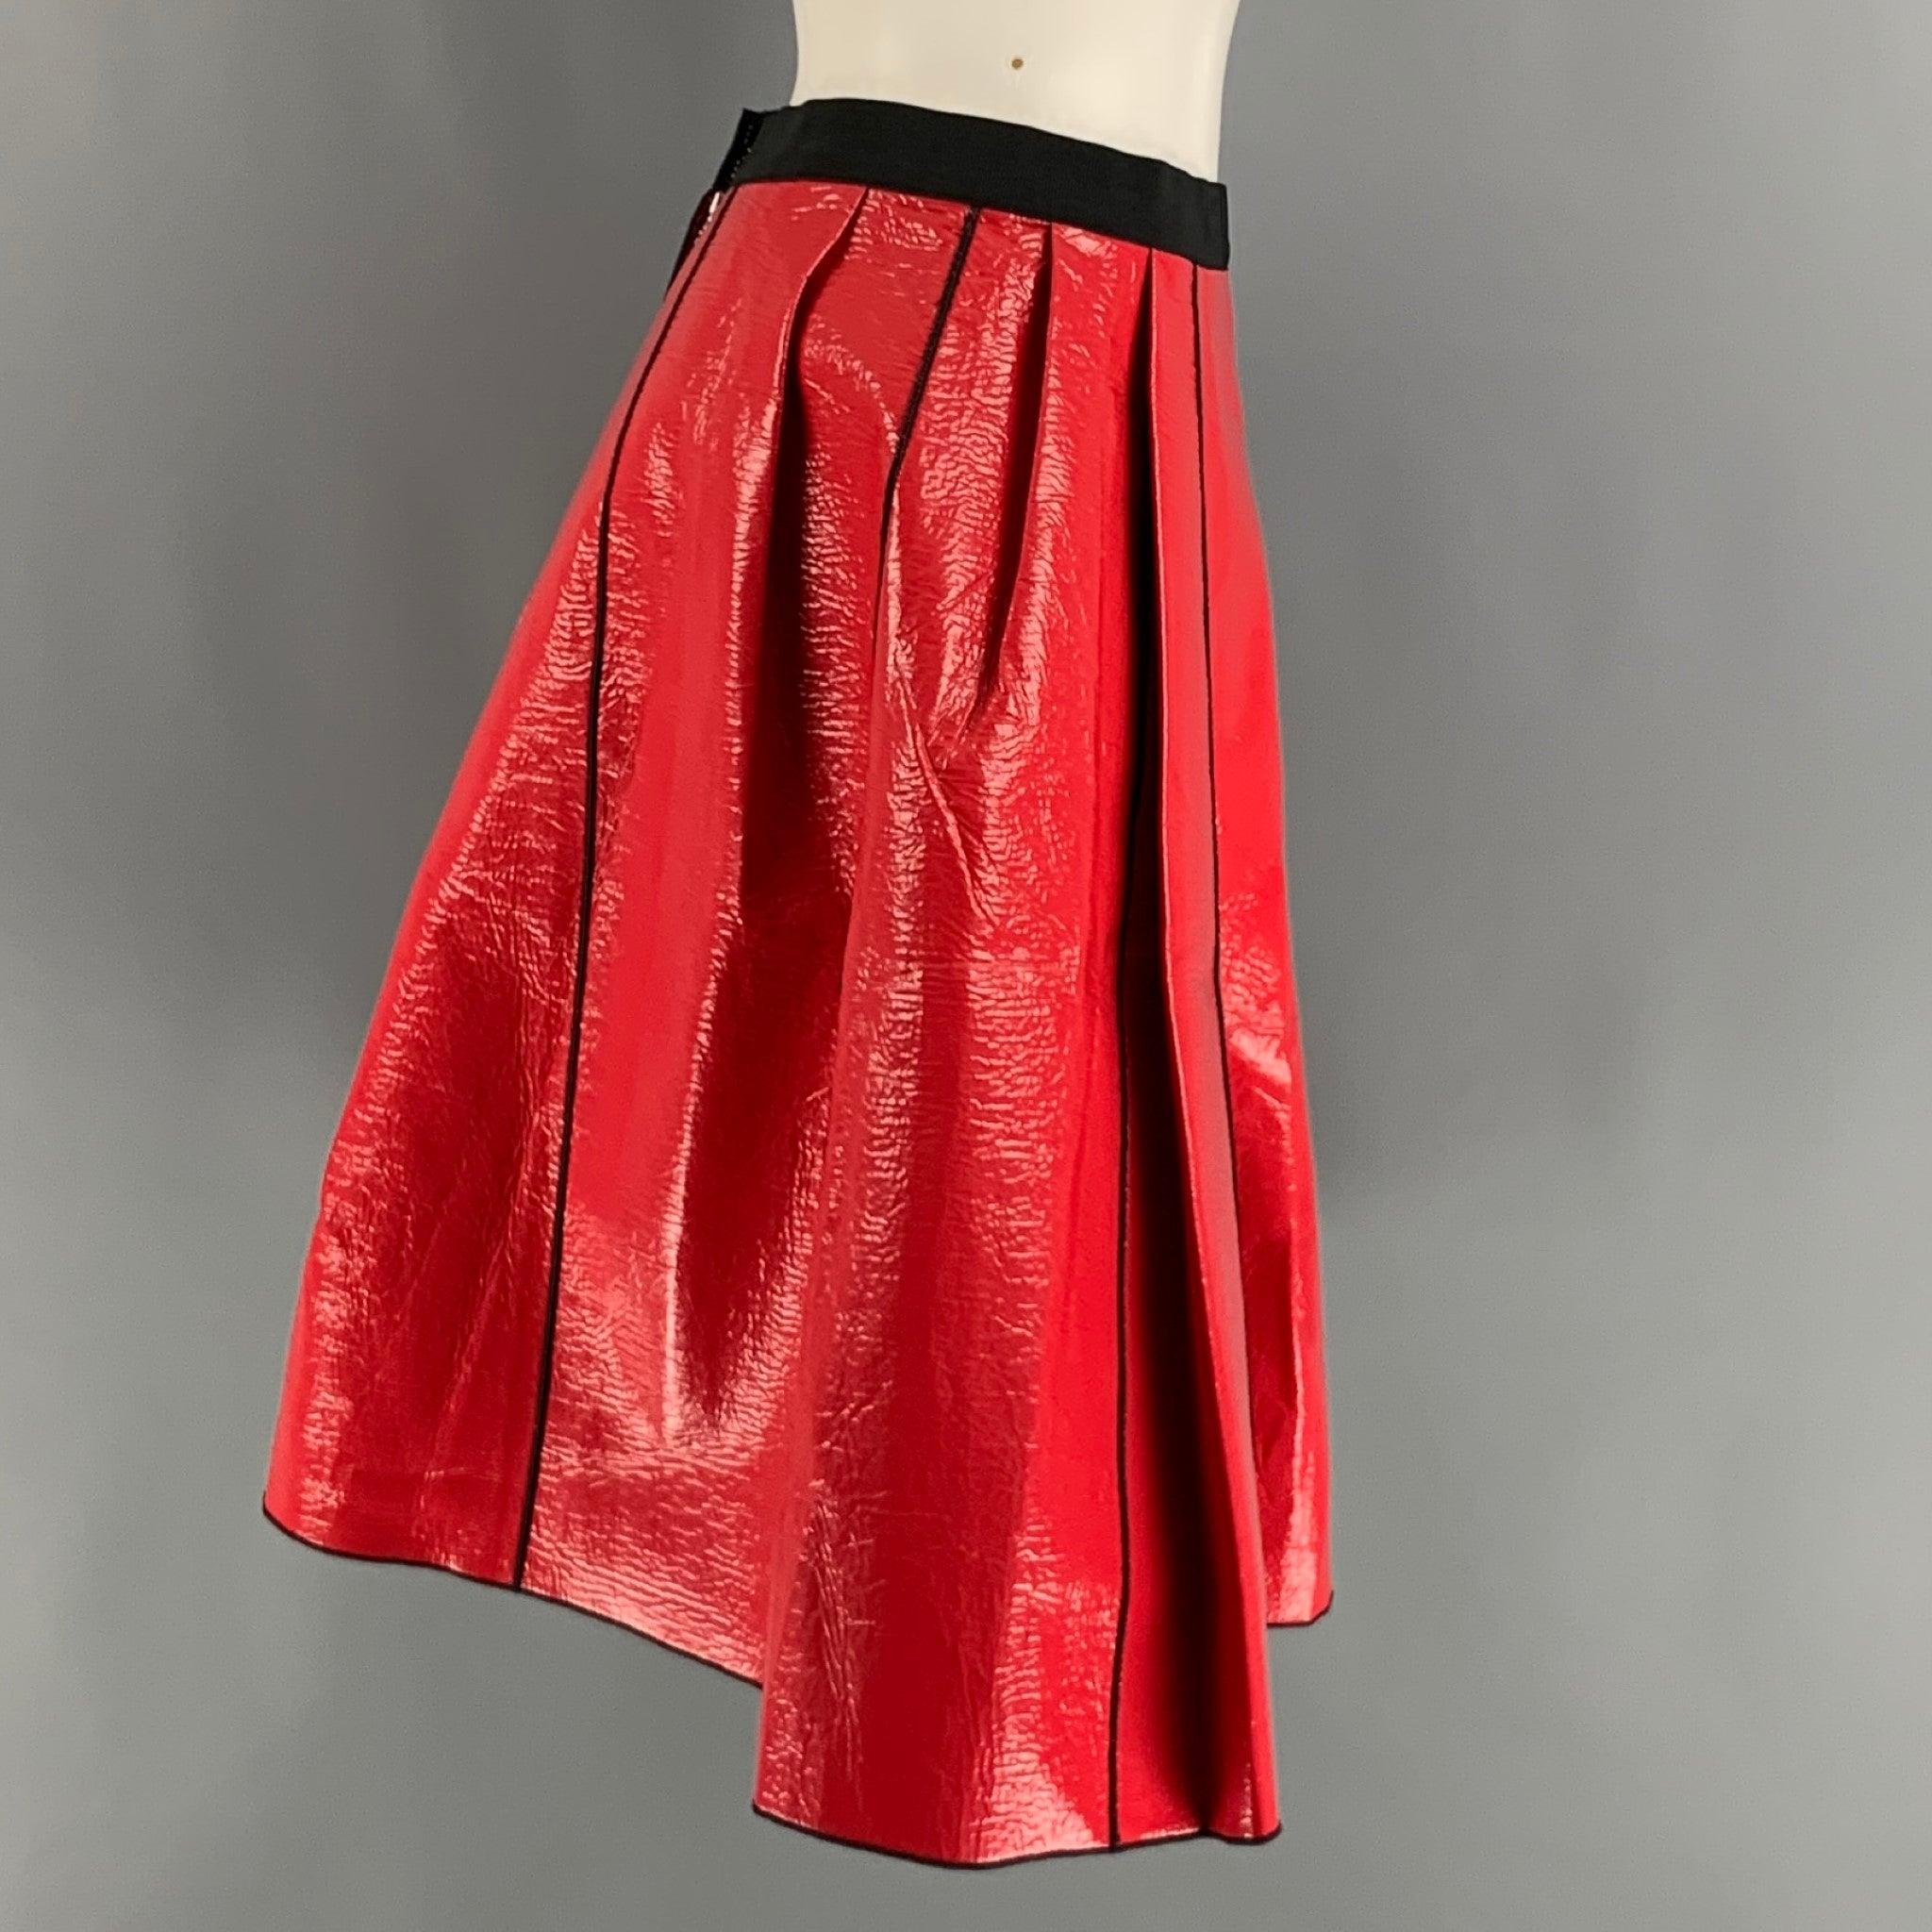 MARC JACOBS knee high skirt comes in a red coated cotton material featuring a a-line style, black top stitching contrast, and a zip up closure.Excellent Pre-Owned Condition. 

Marked:  
2 

Measurements: 
  Waist: 28 inches Hip: 44 inches Length: 21